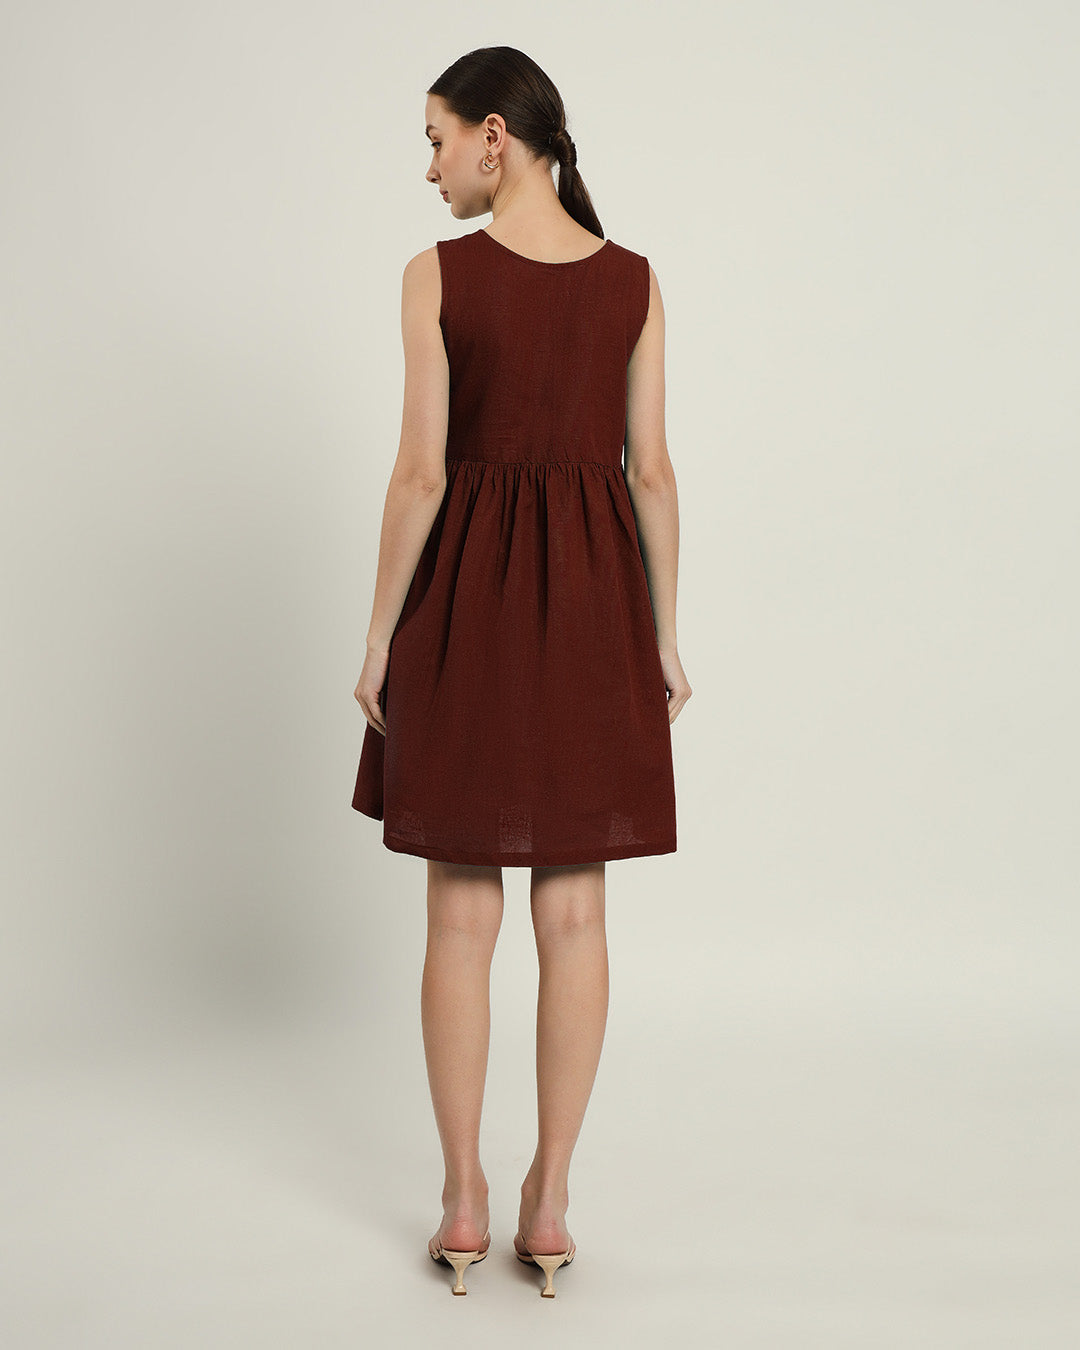 The Chania Rouge Dress